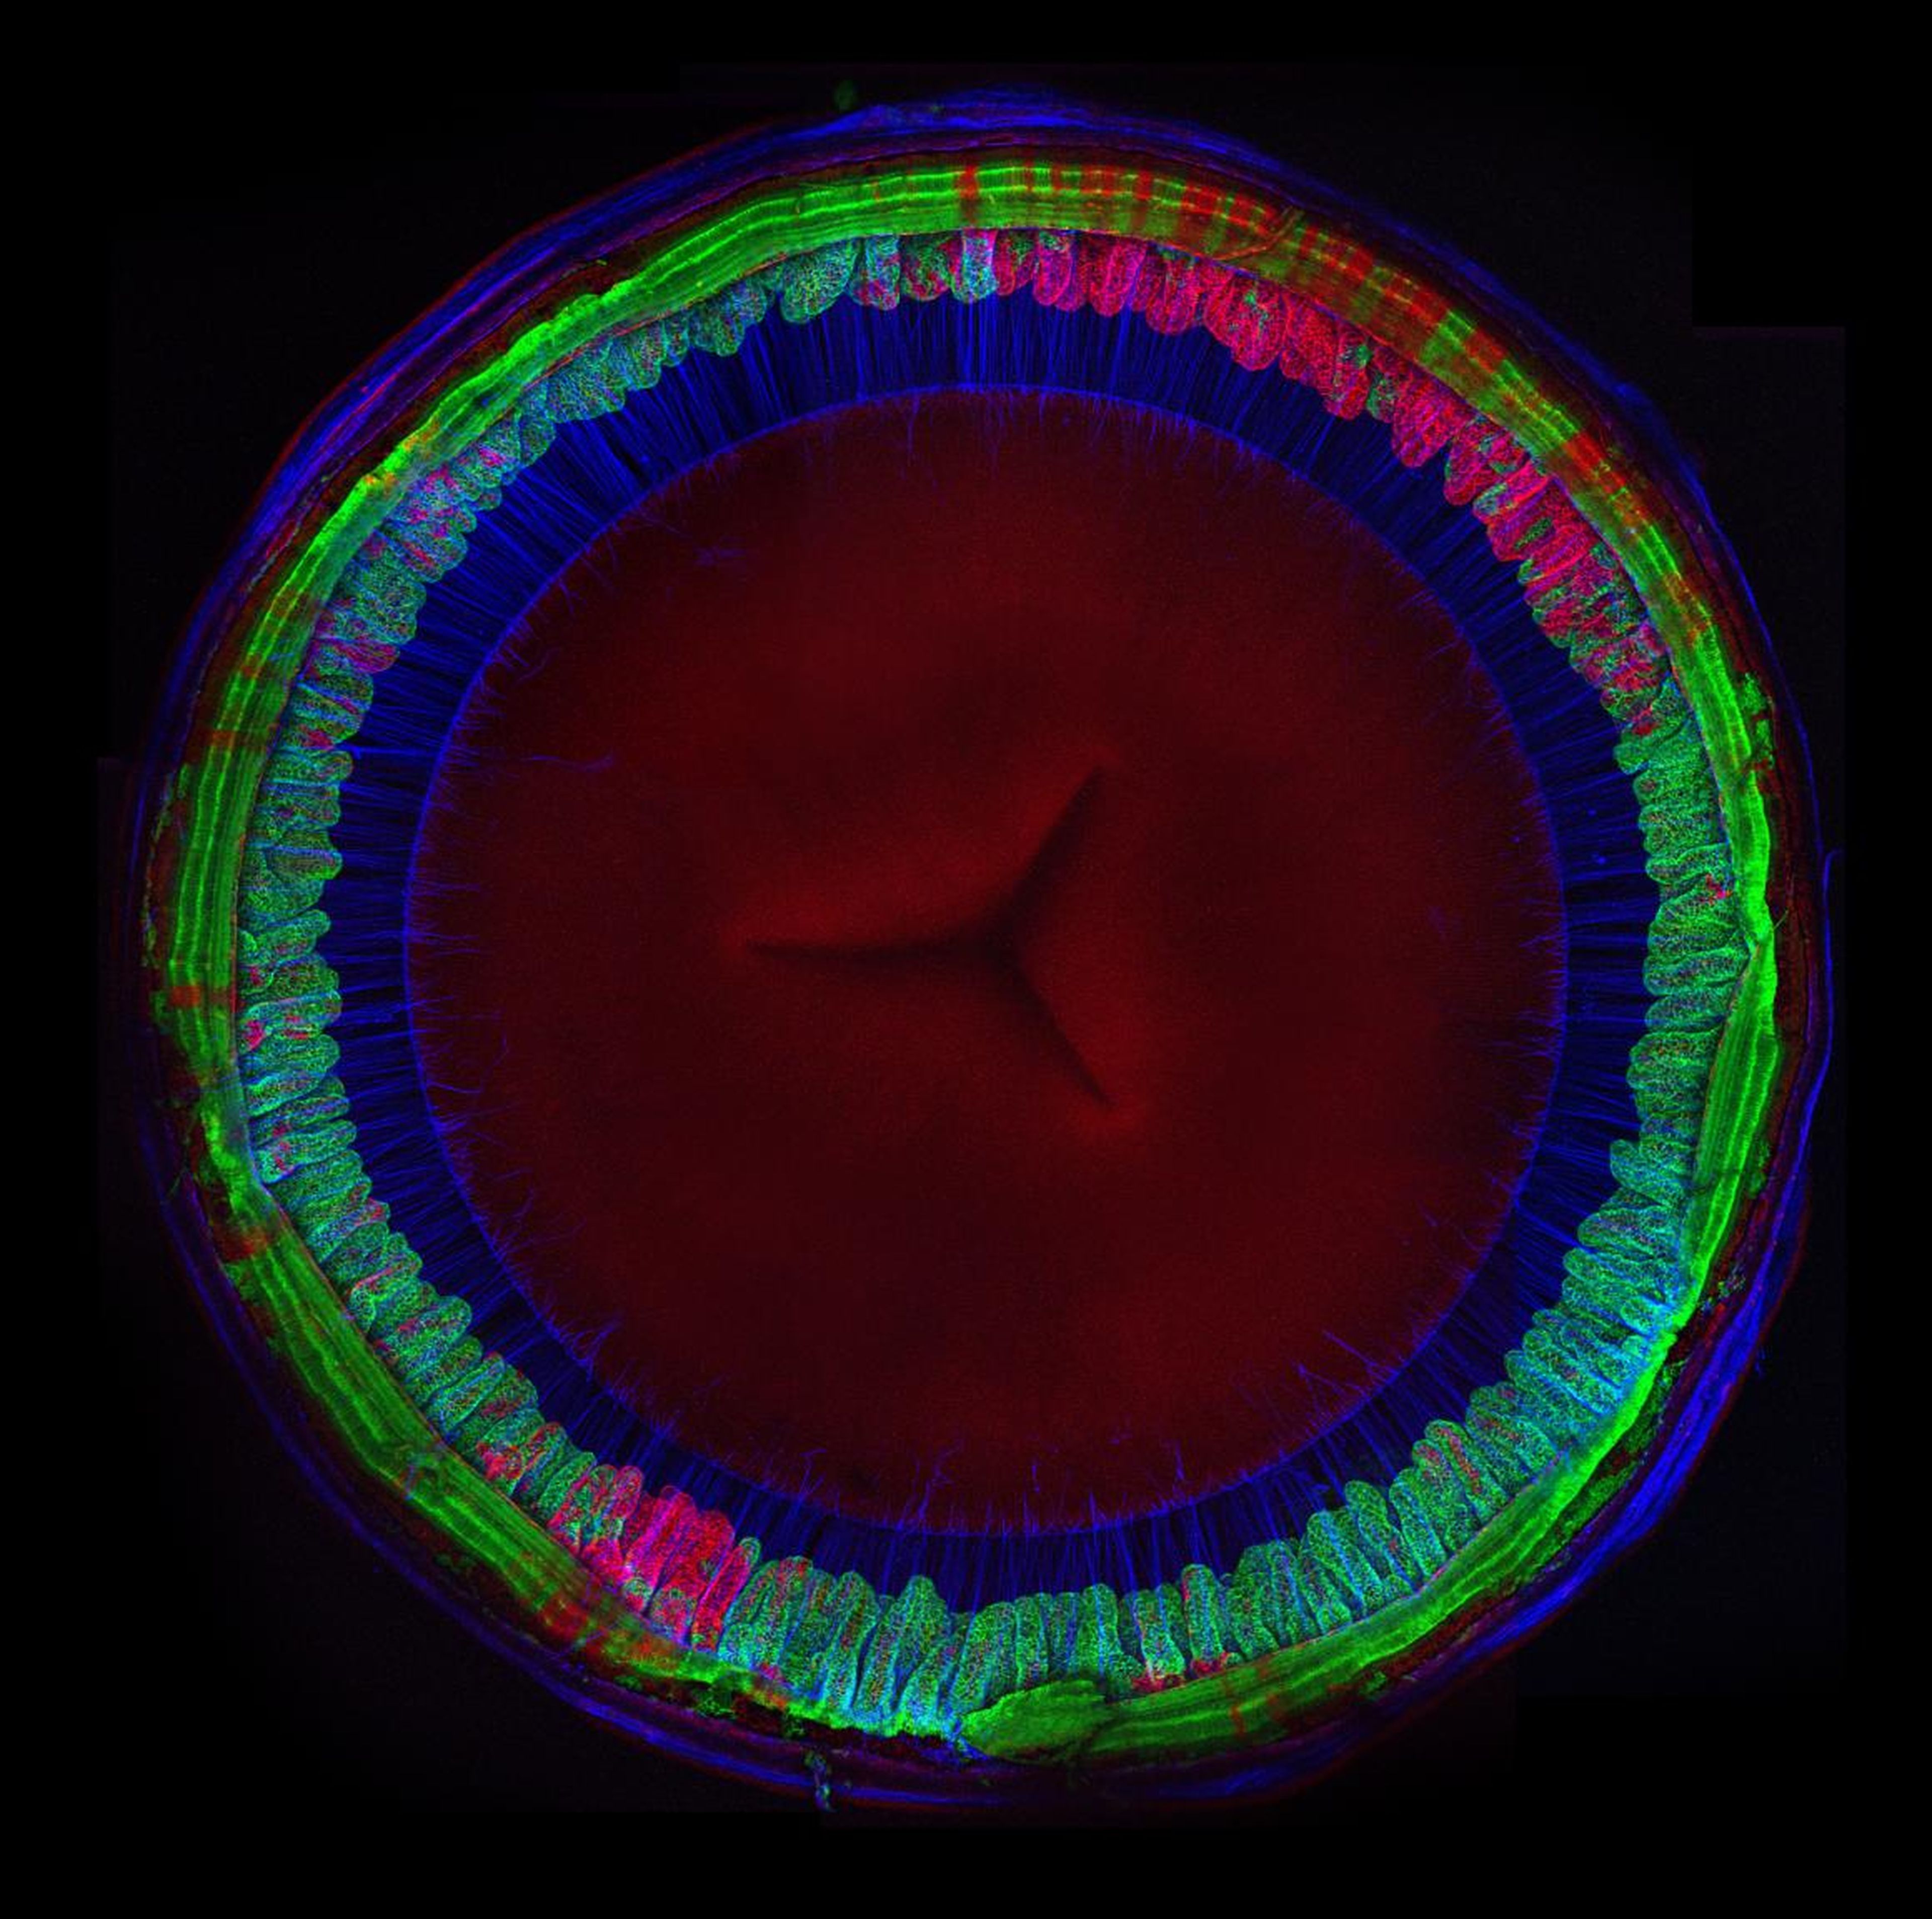 The inside of a mouse eye. Fibers (blue) help suspend the lens at the center (red).